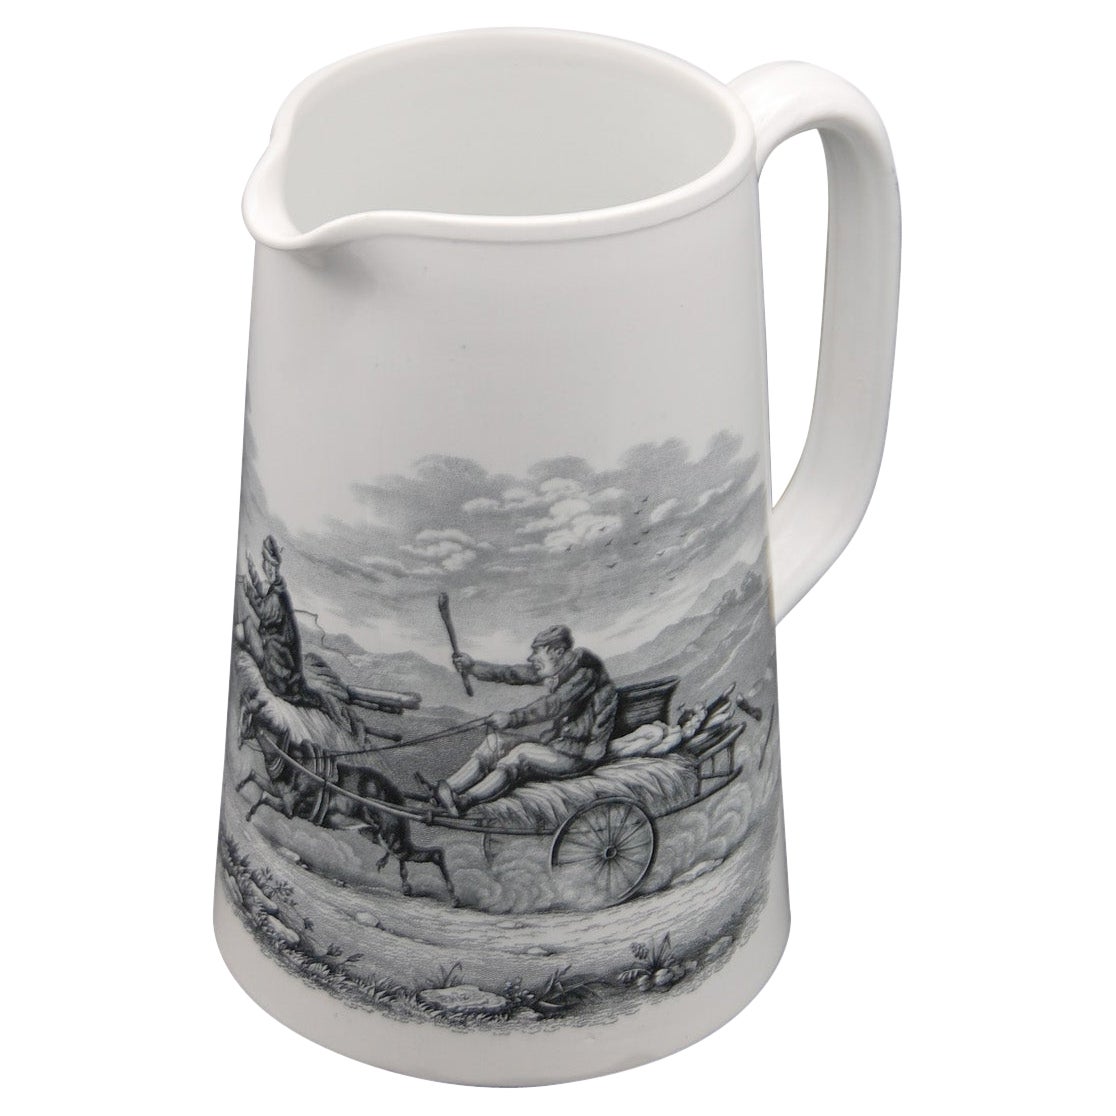 English Rare Copeland Ironstone Large Pitcher "Going to the Derby" 1867 to 1890 For Sale